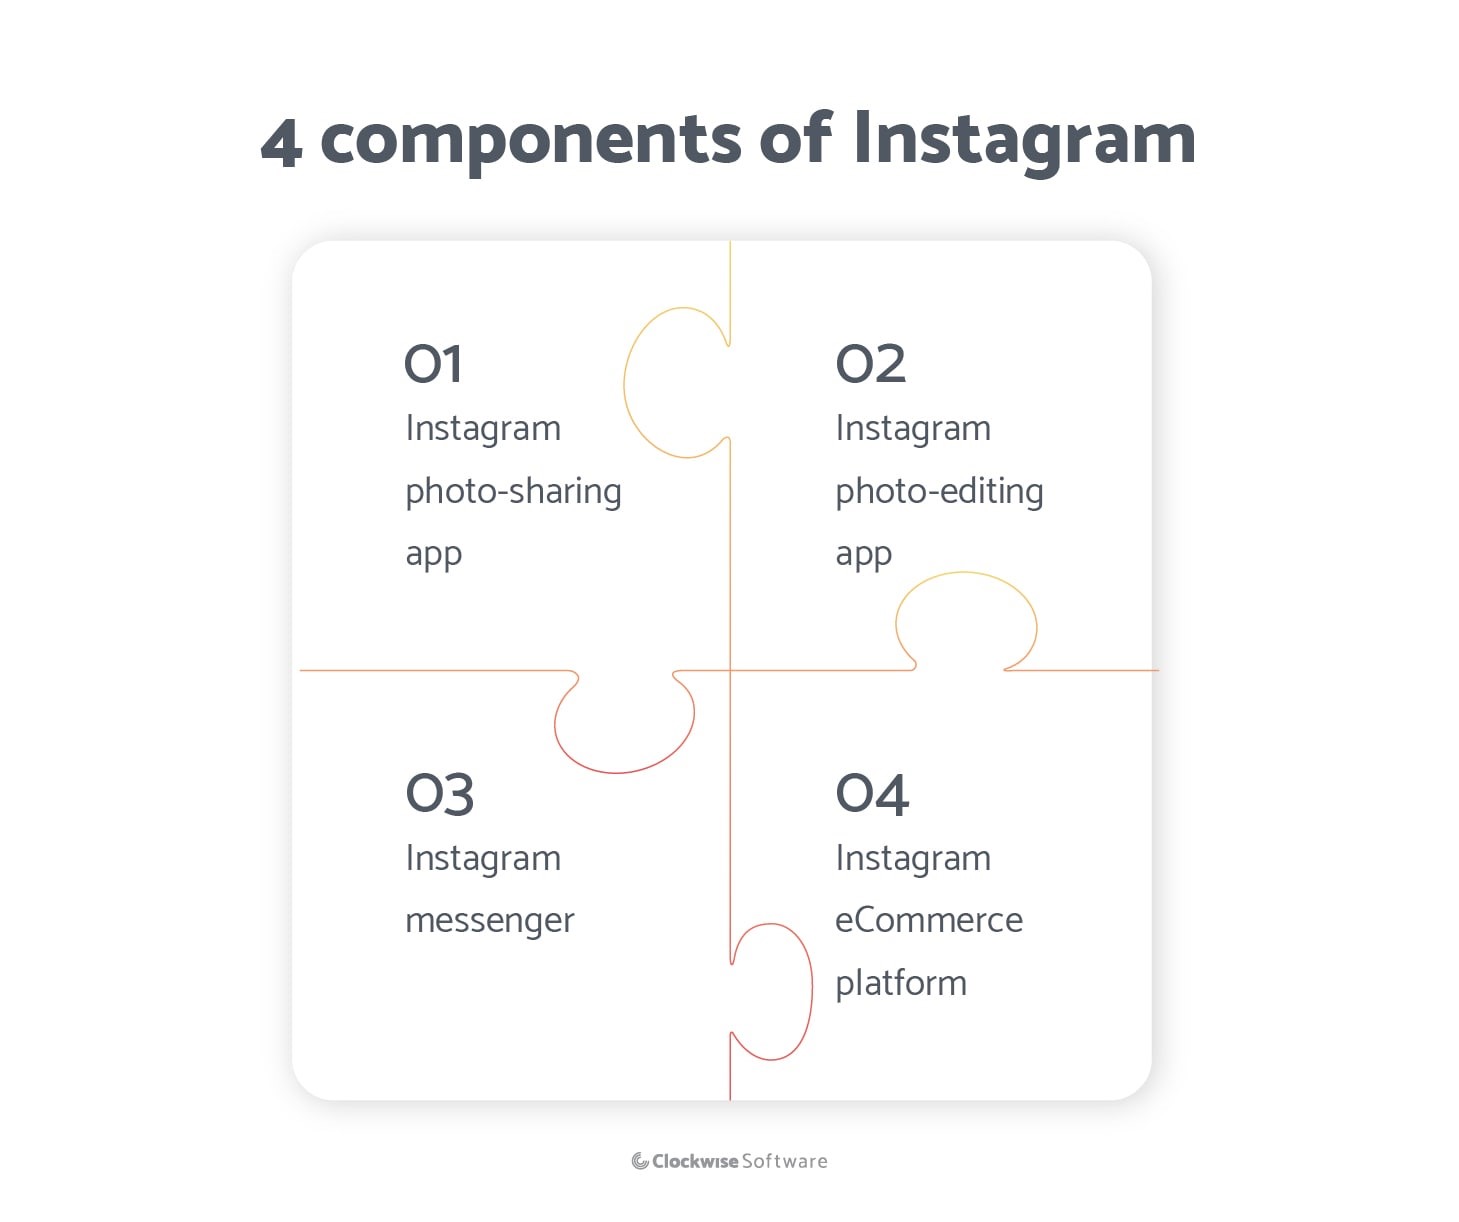 4 components of Instagram